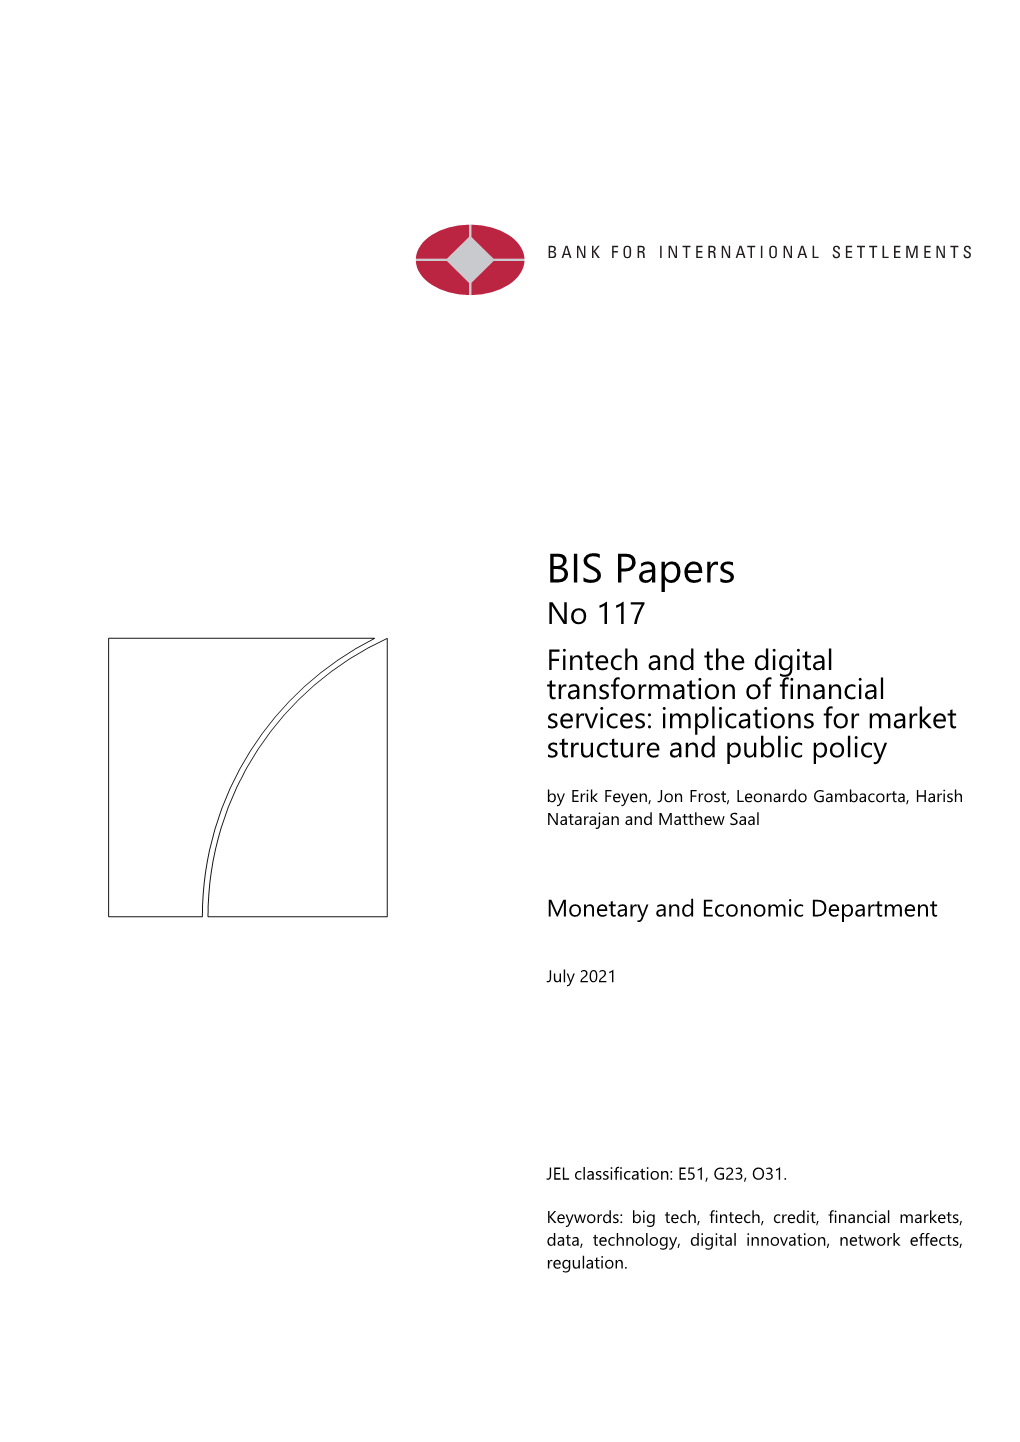 No 117 Fintech and the Digital Transformation of Financial Services: Implications for Market Structure and Public Policy